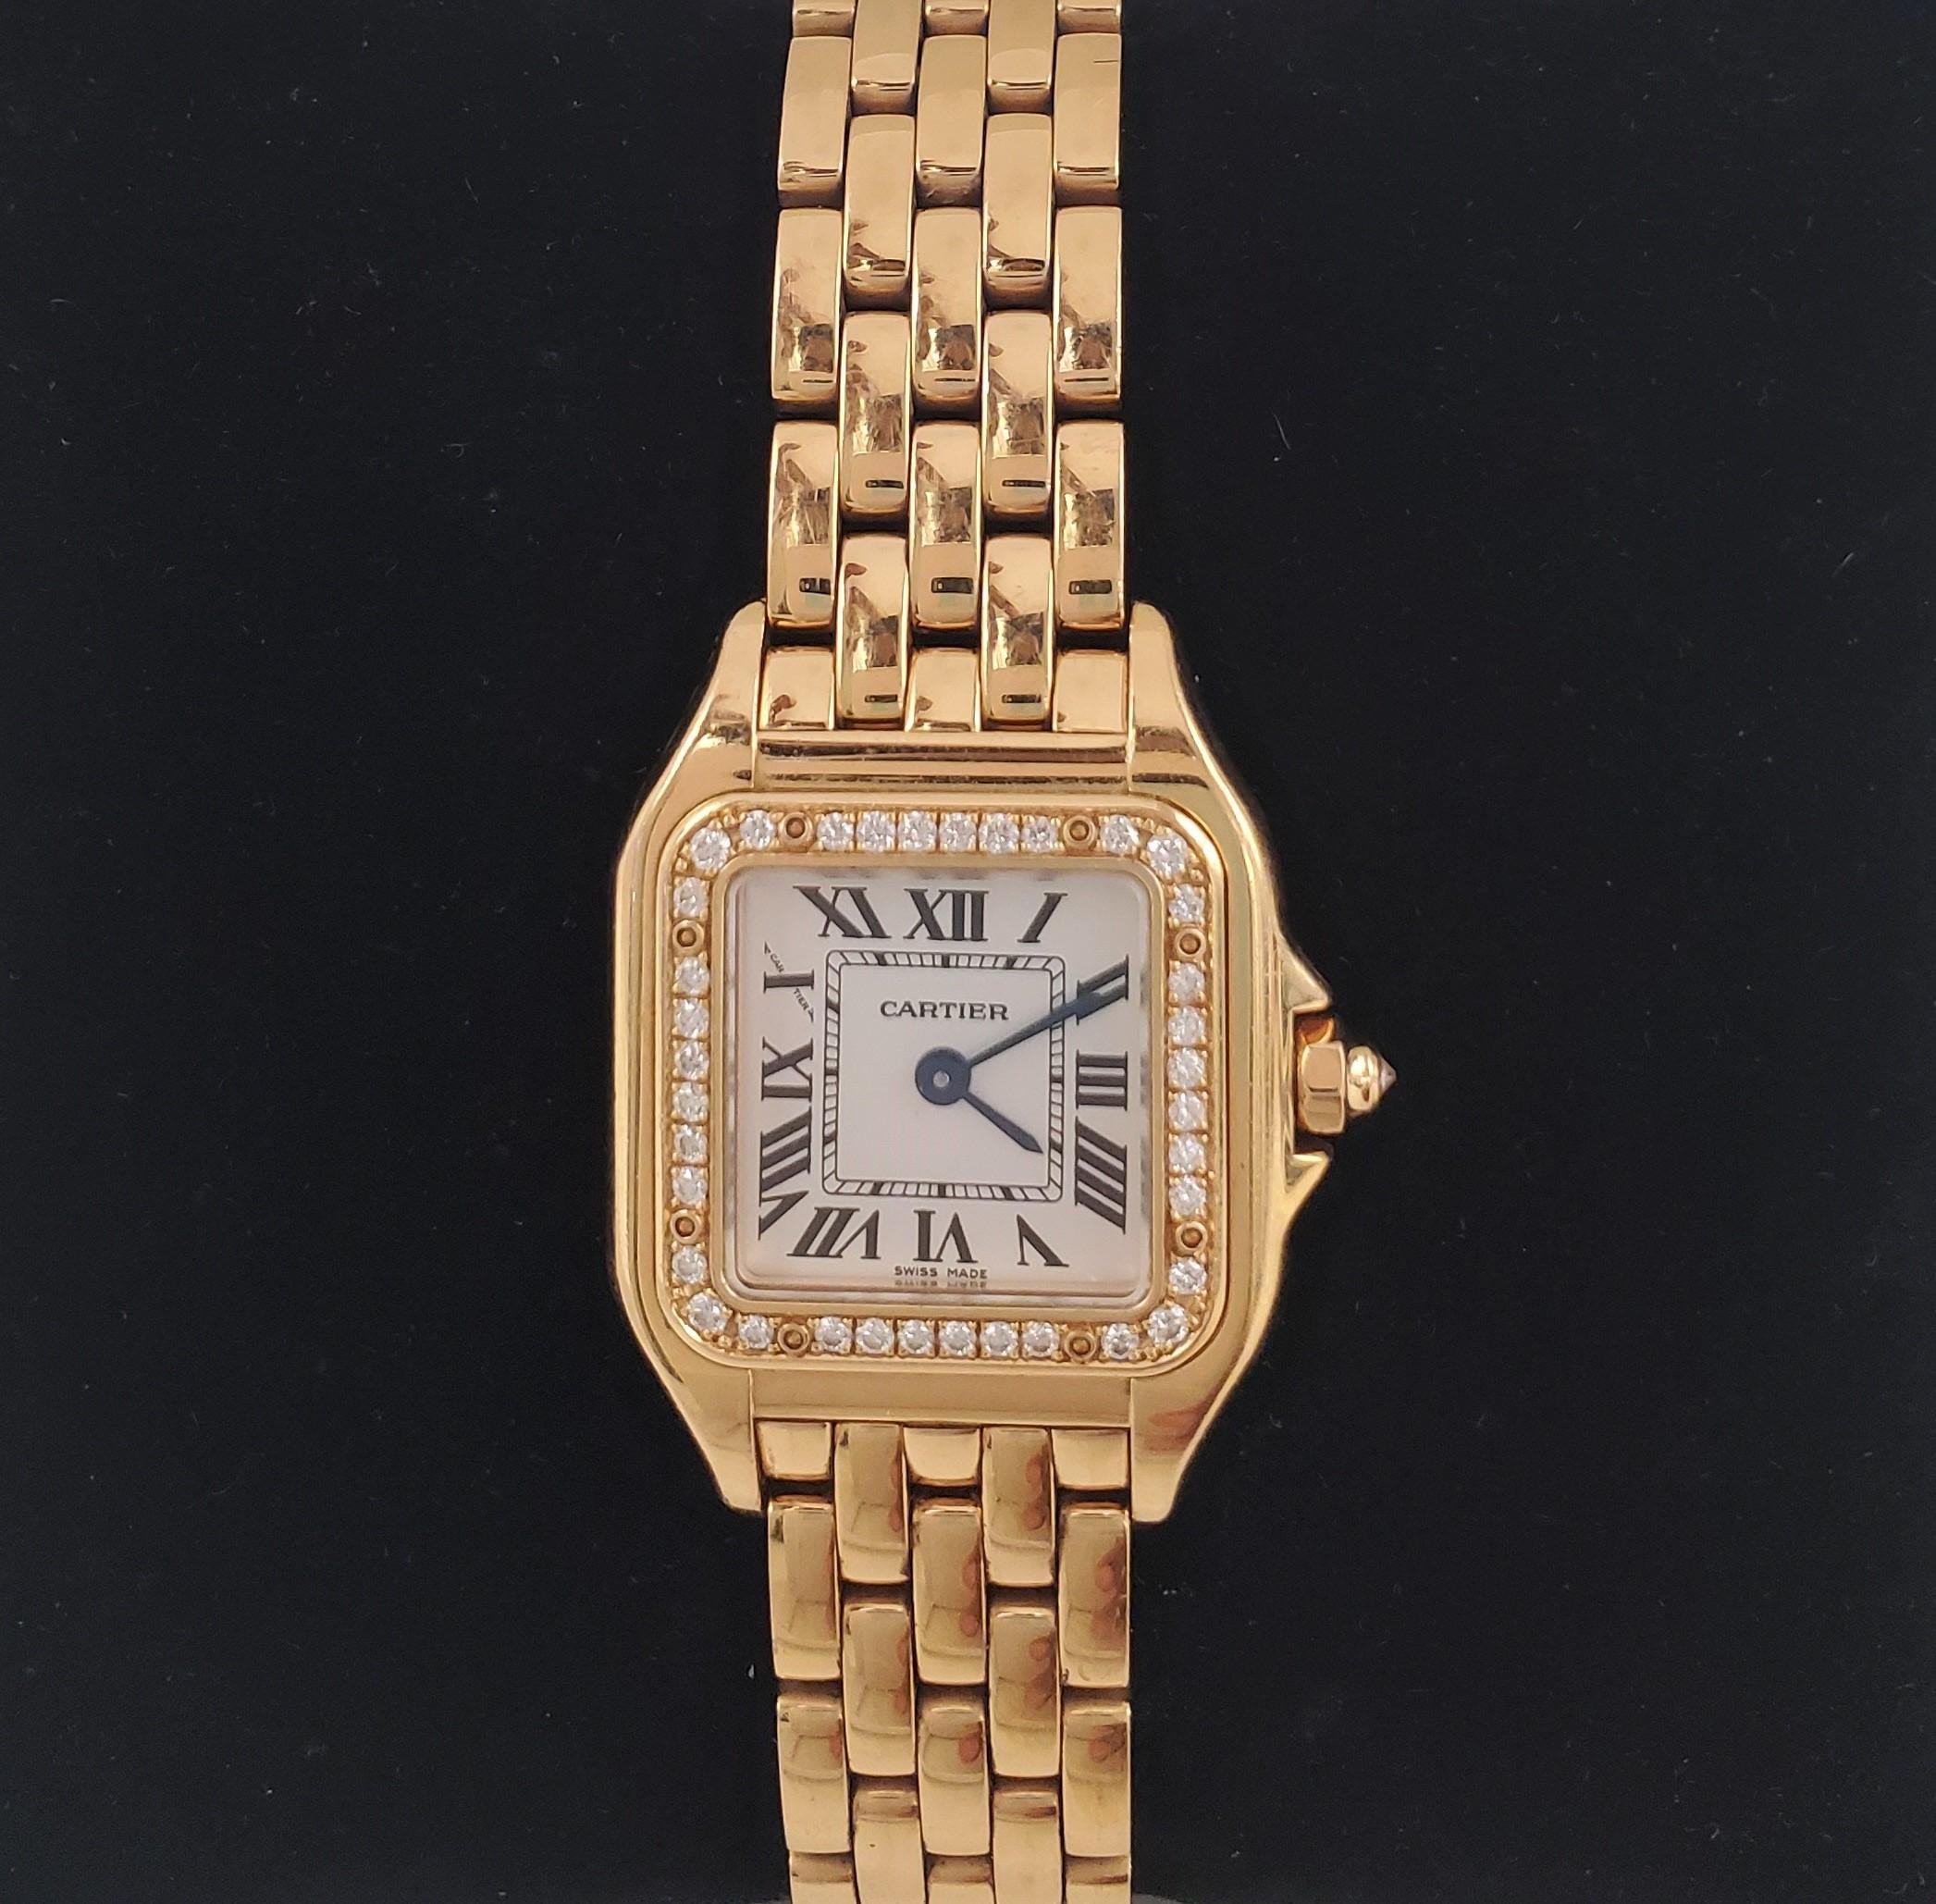 Classic Panthere de Cartier watch crafted in 18 karat pink gold with diamond bezel. The rectangular watch case measures 22 x 30mm and the bezel is set with an estimated 0.37 carats of round brilliant cut diamonds (E-F color, VS clarity). Diamond